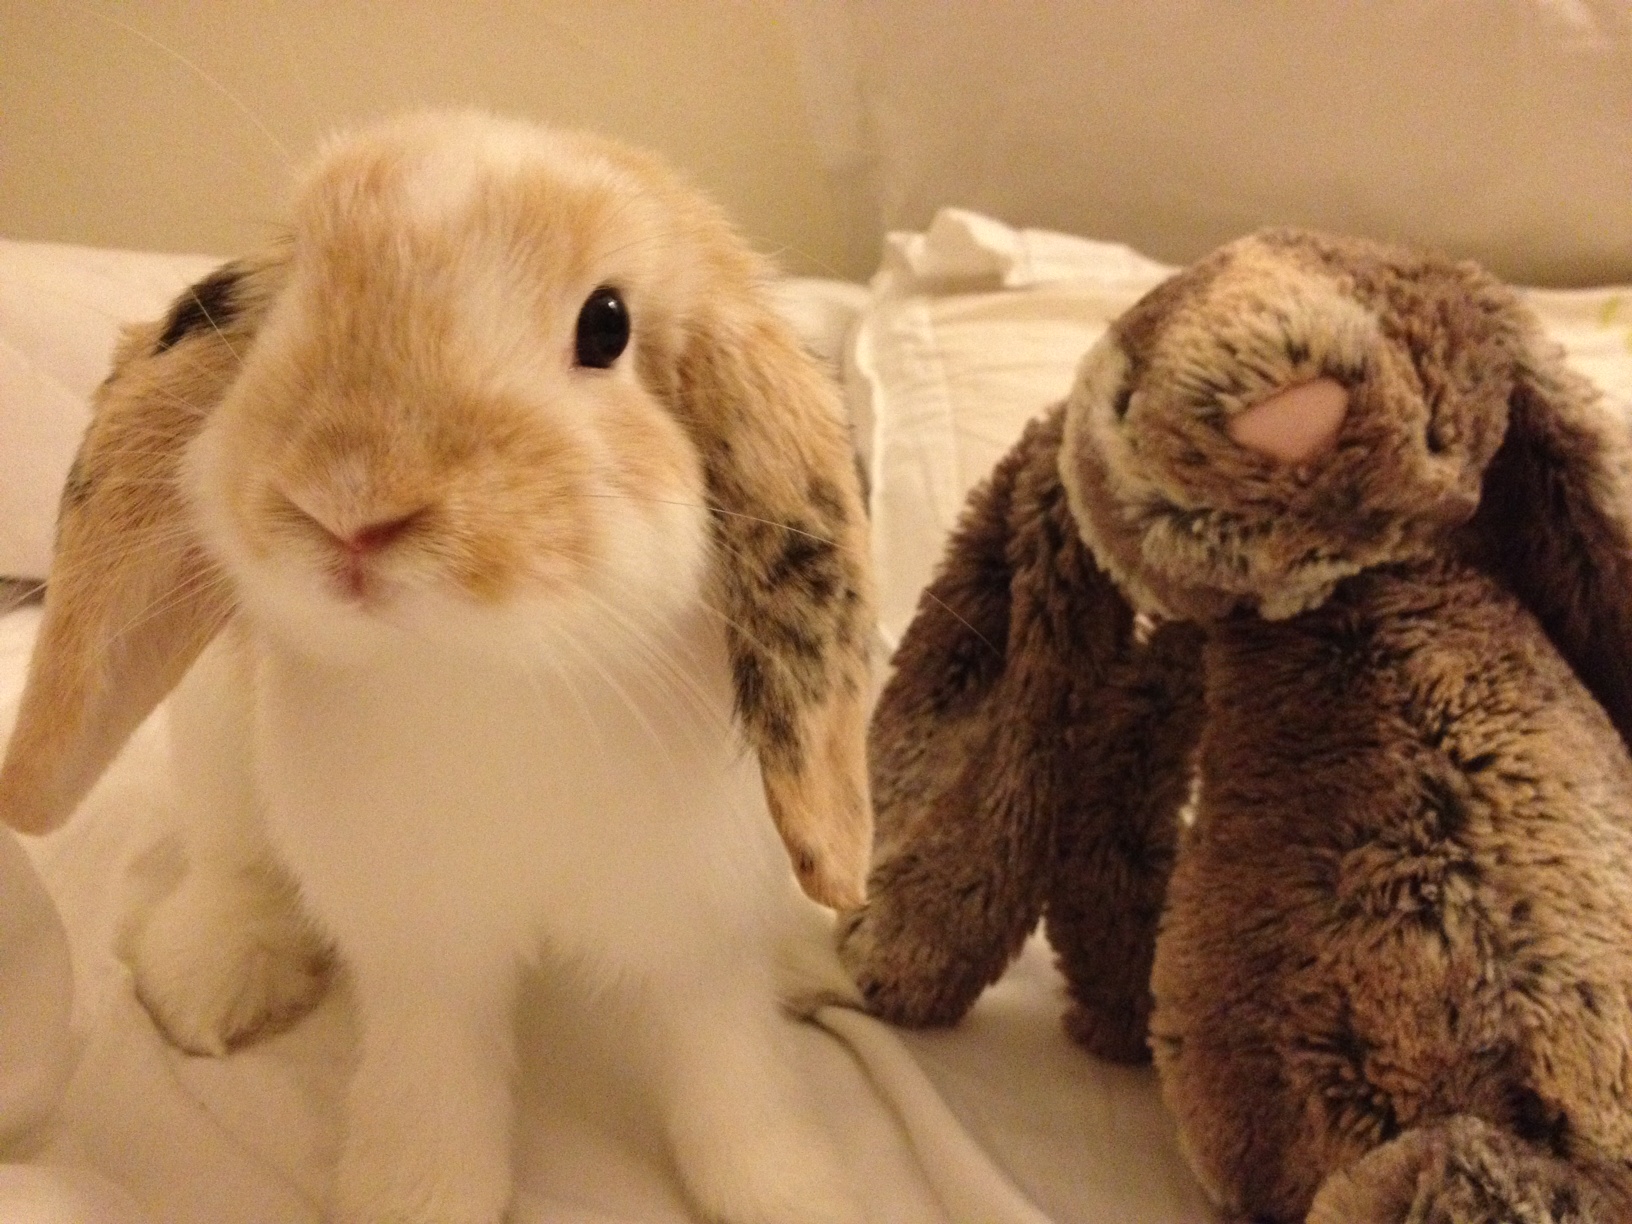 Bunny Hangs Out with Some Plush Friends 1